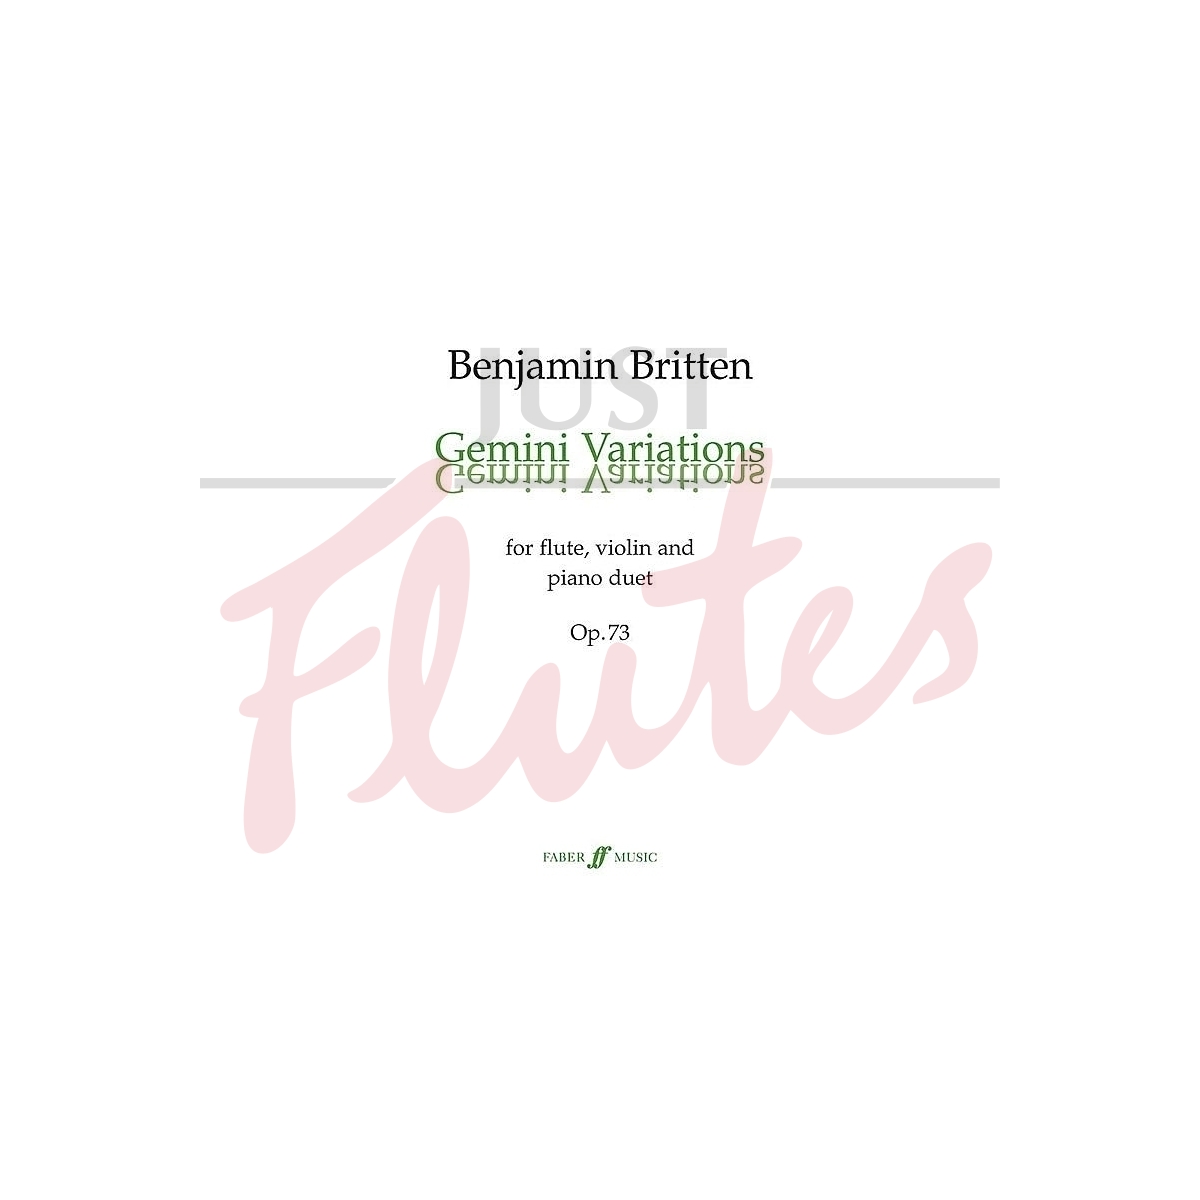 Gemini Variations for Flute, Violin and Piano Duet